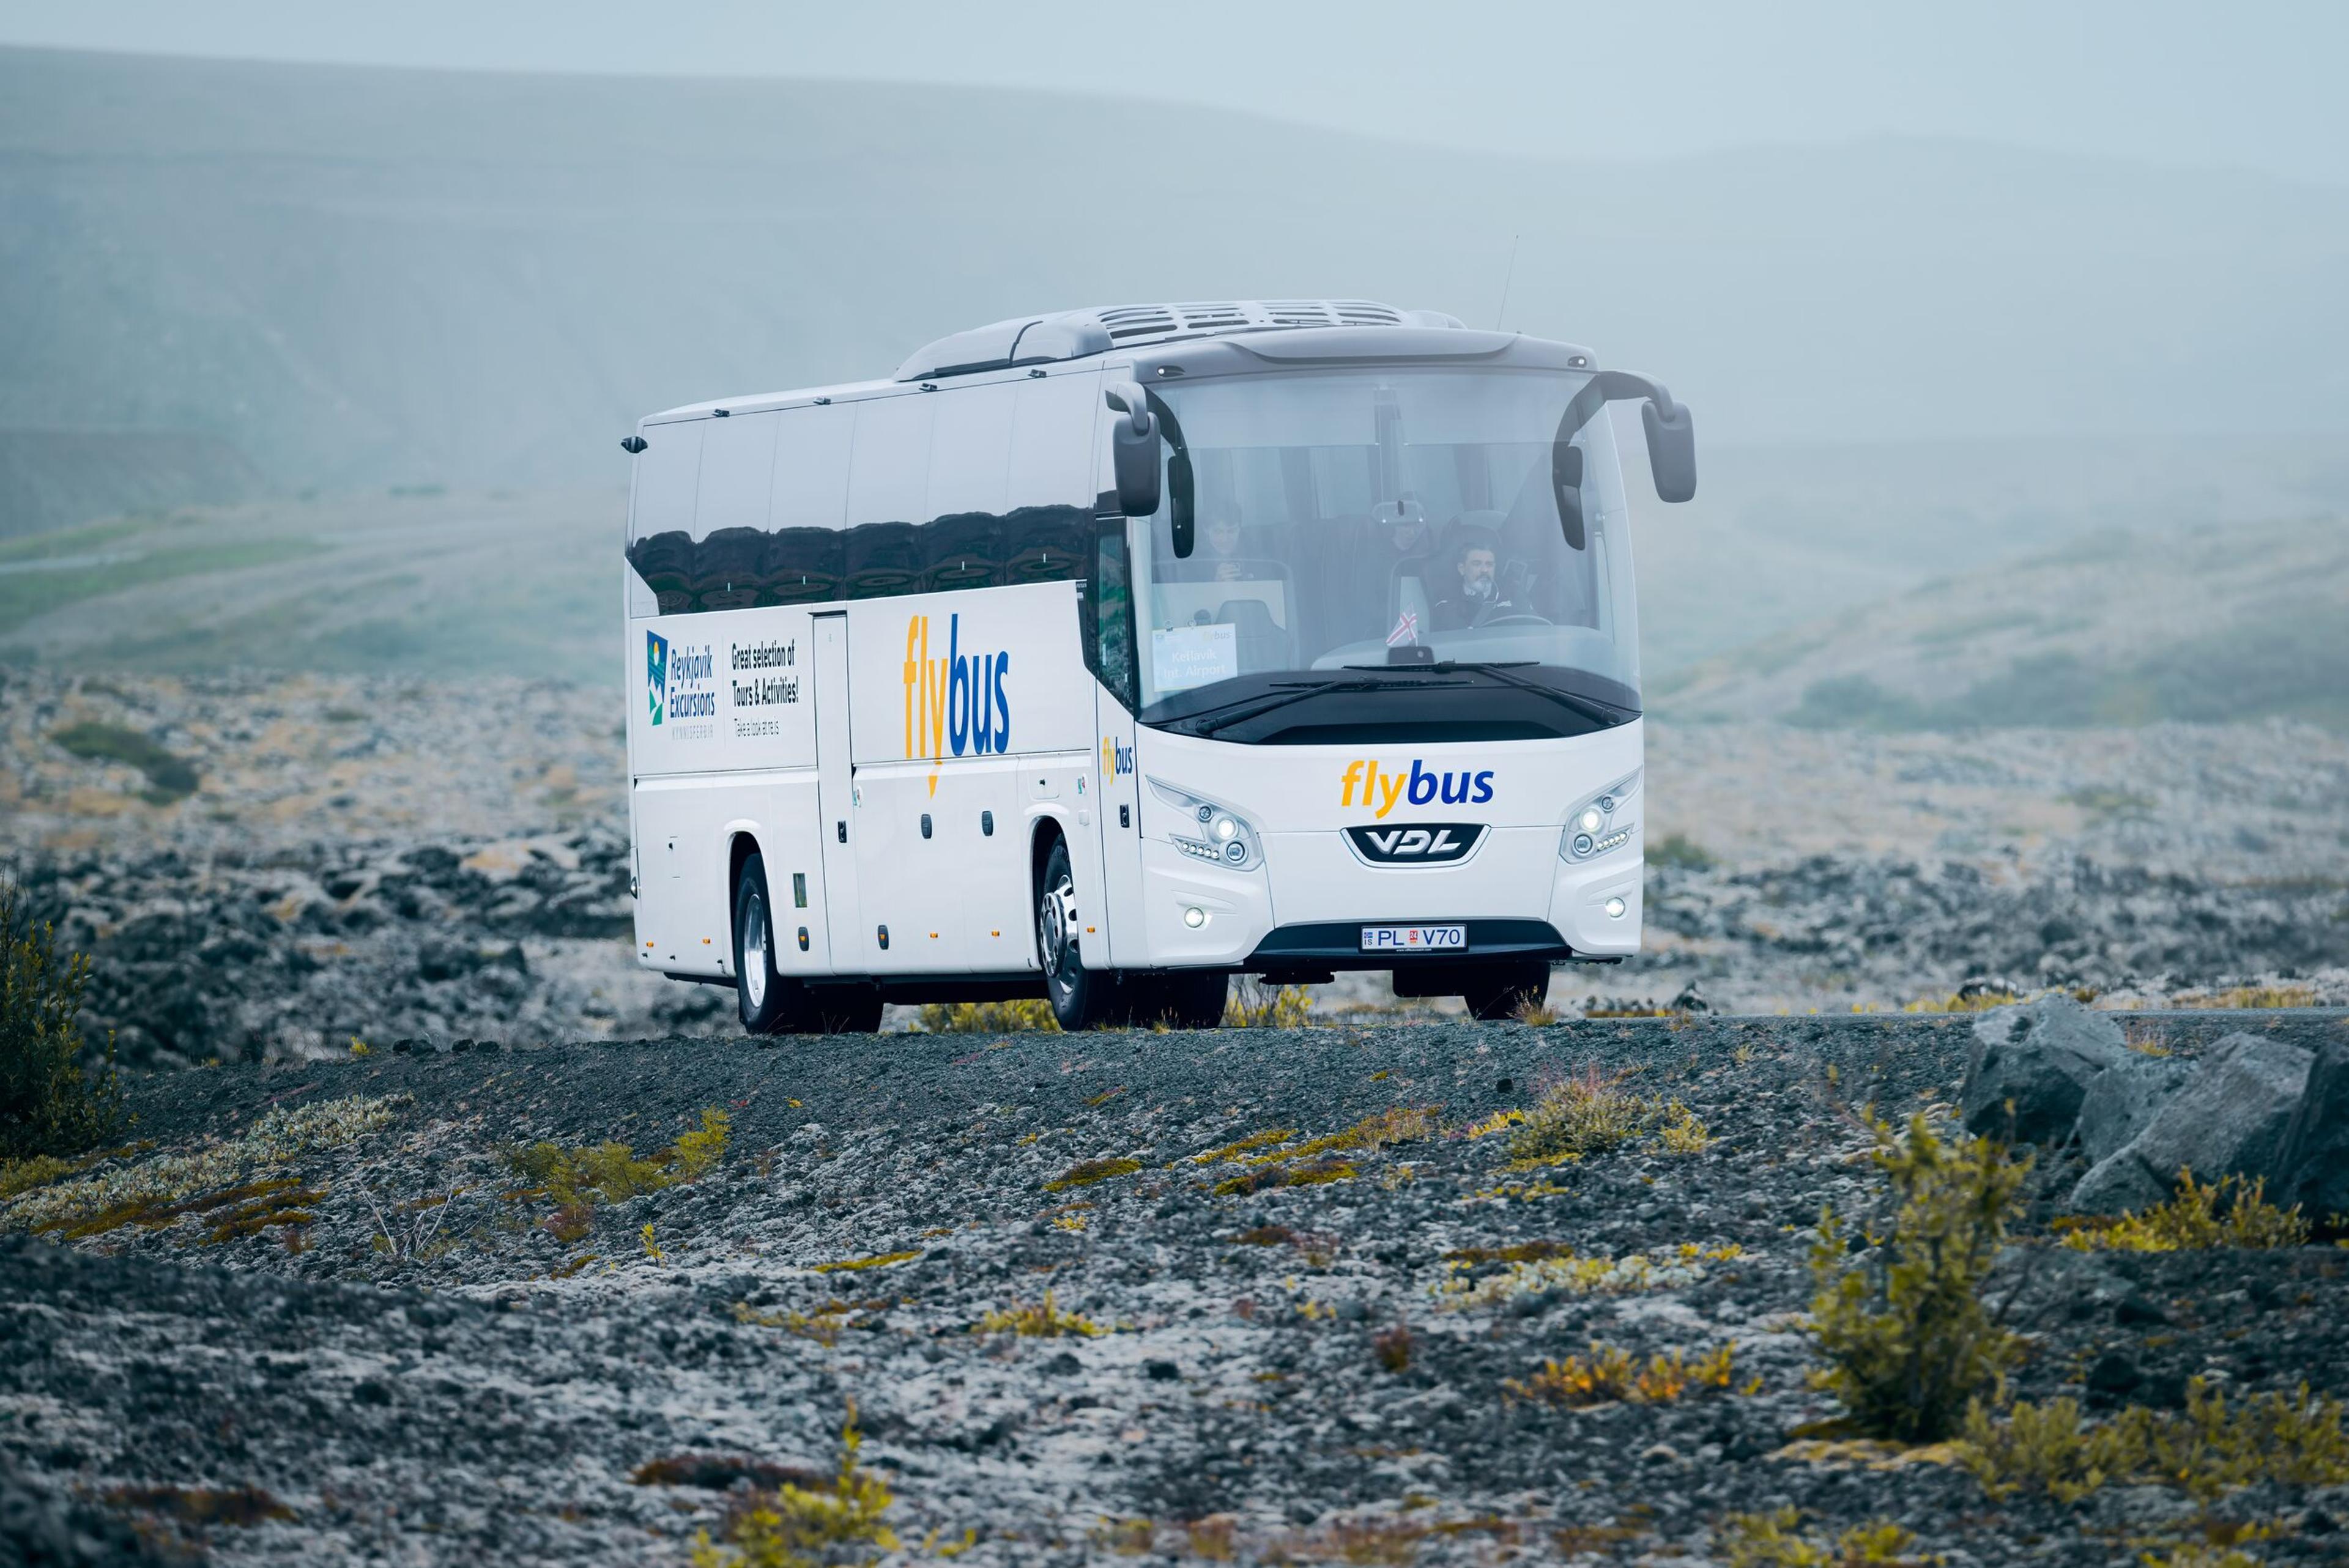 The Blue Lagoon shuttle bus travels through the terrain, with the shimmering lagoon visible in the background.